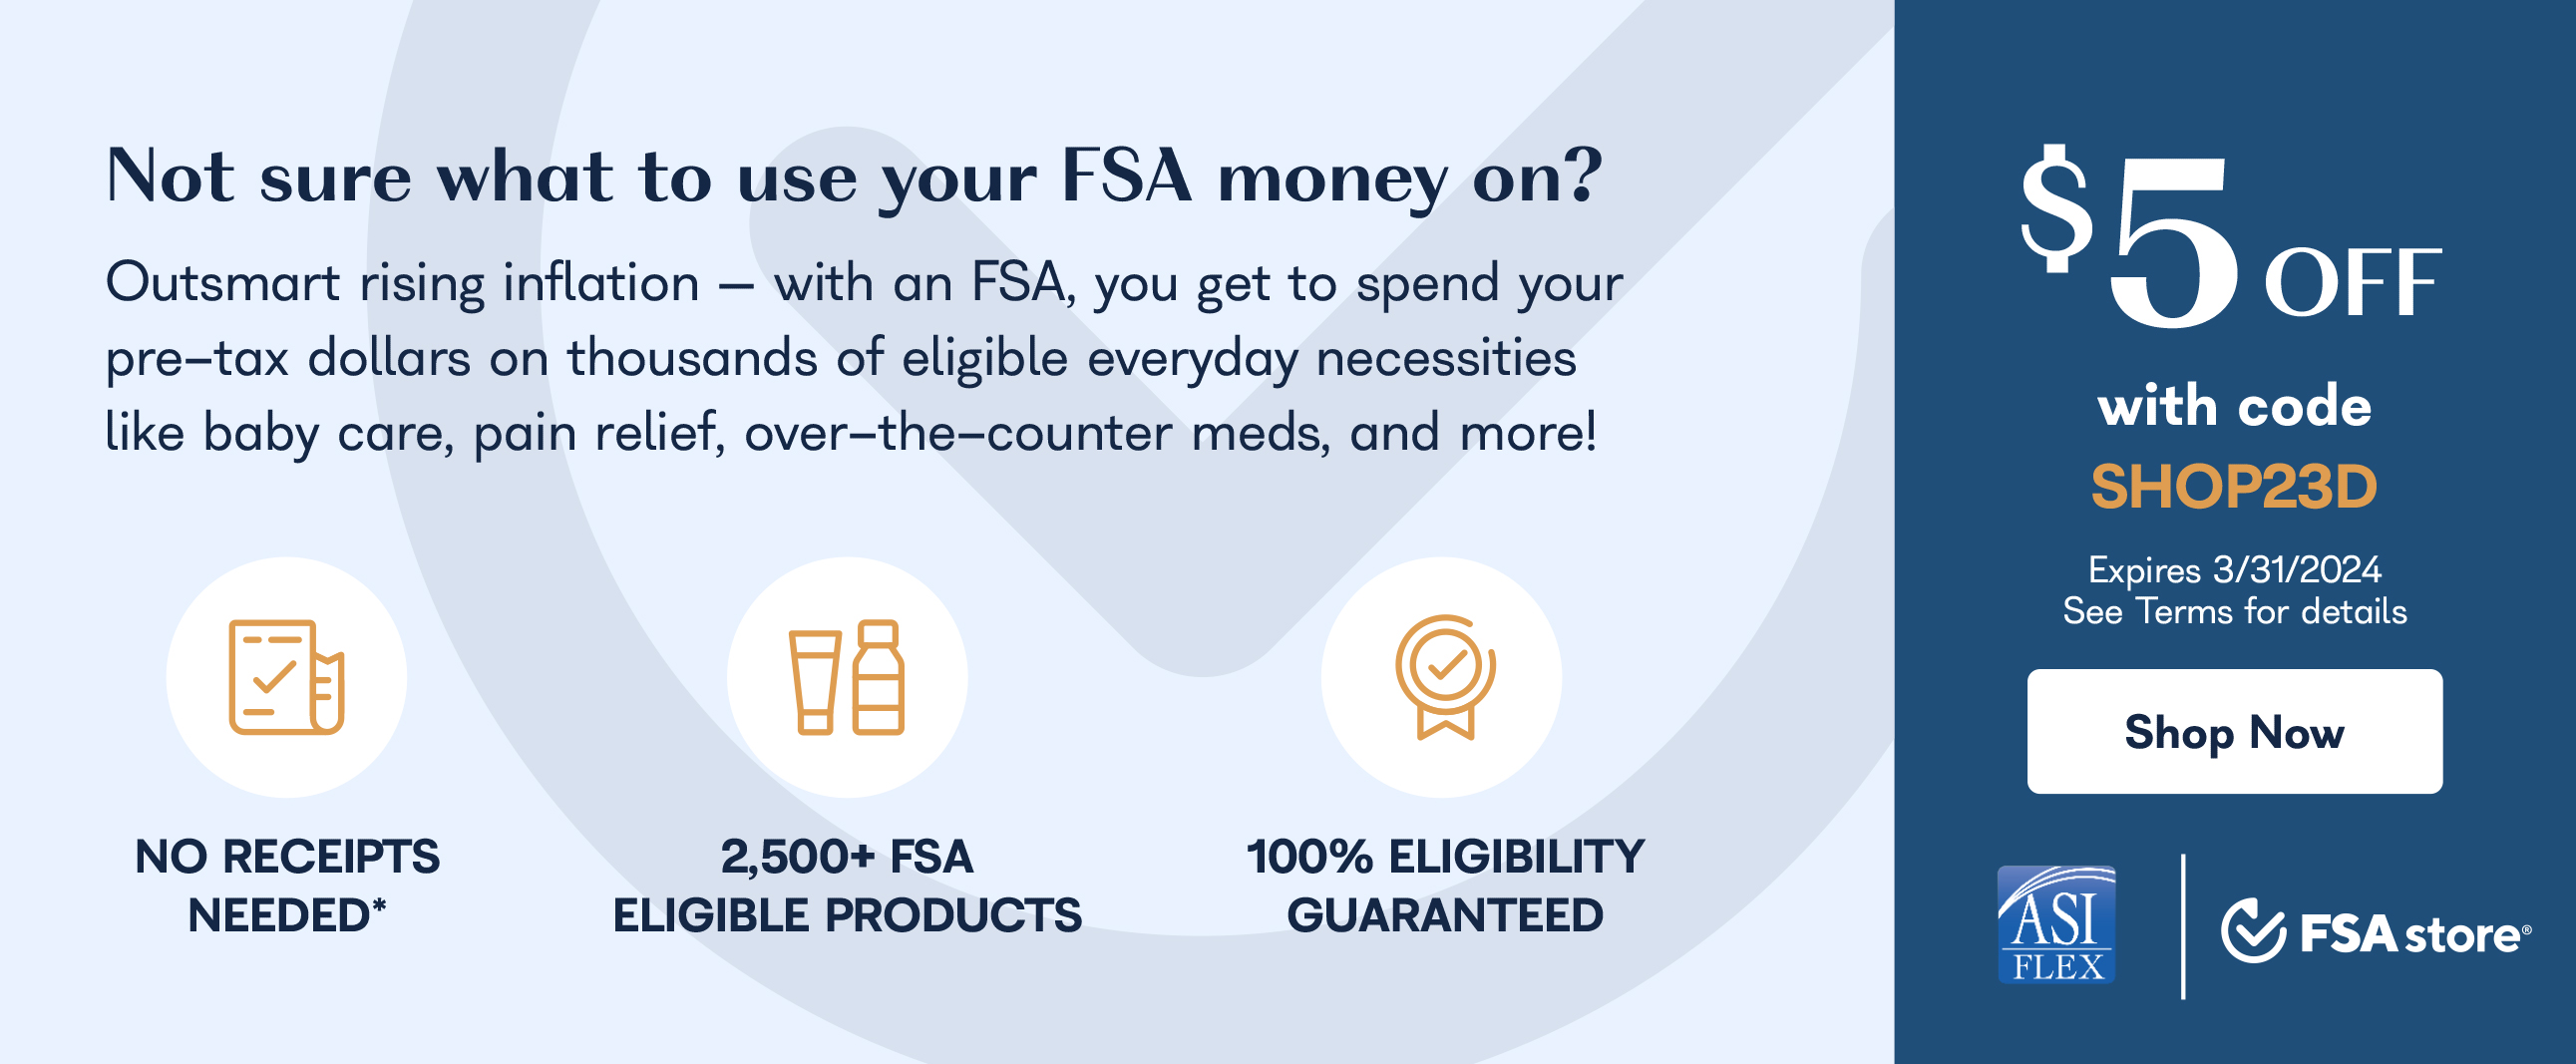 Flexible Spending Account: How to Buy Eligible Items to Use Your